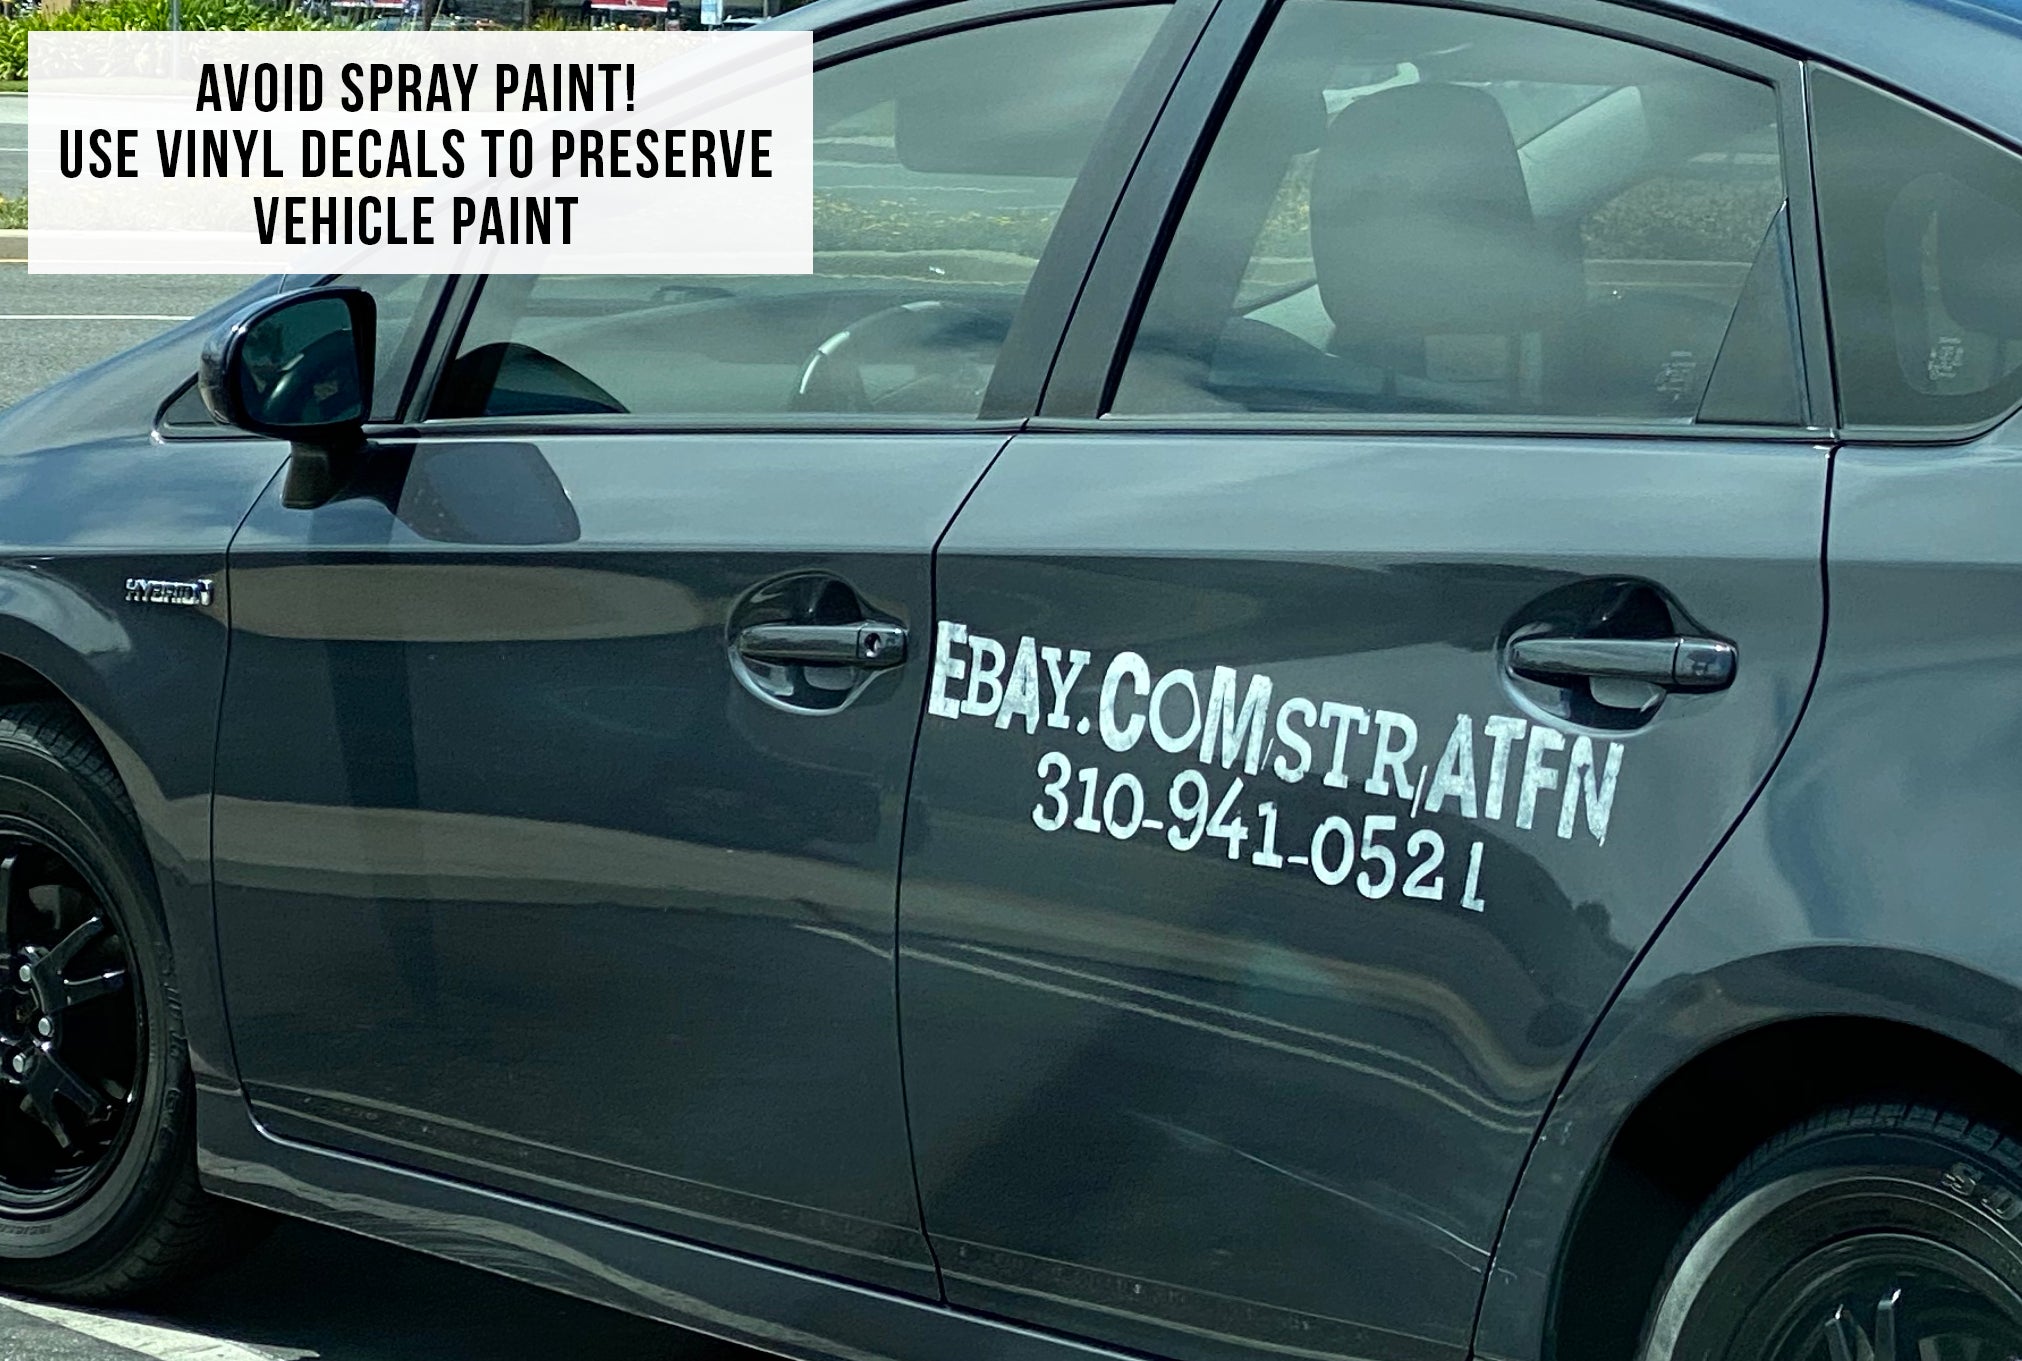 don't use spray paint for vehicle lettering, use professional decals